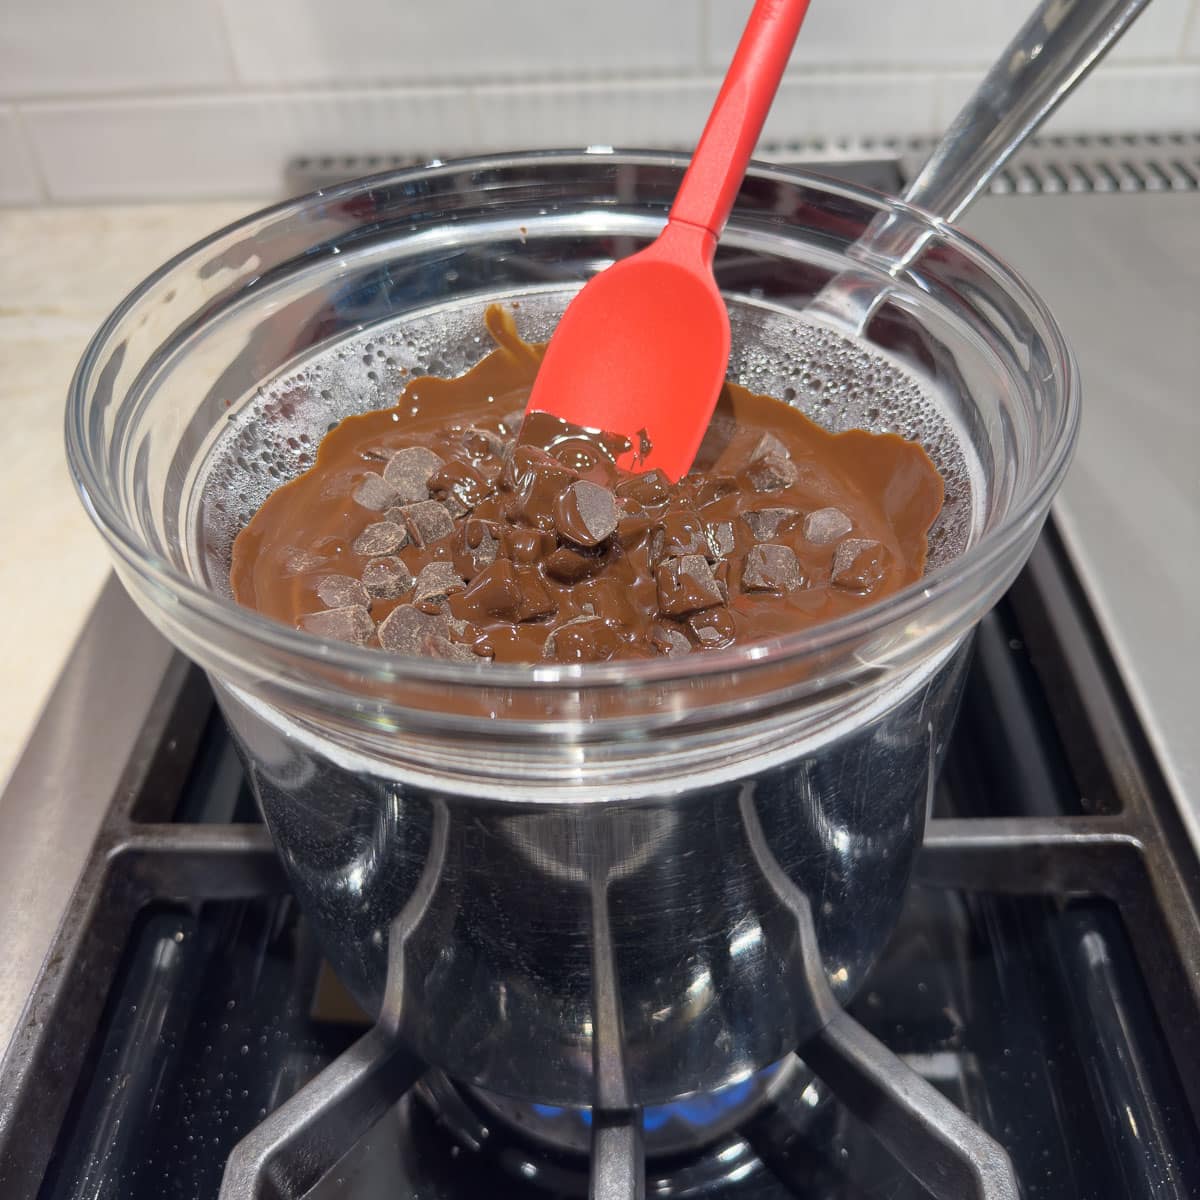 Chocolate melting on the stovetop in a double boiler.
